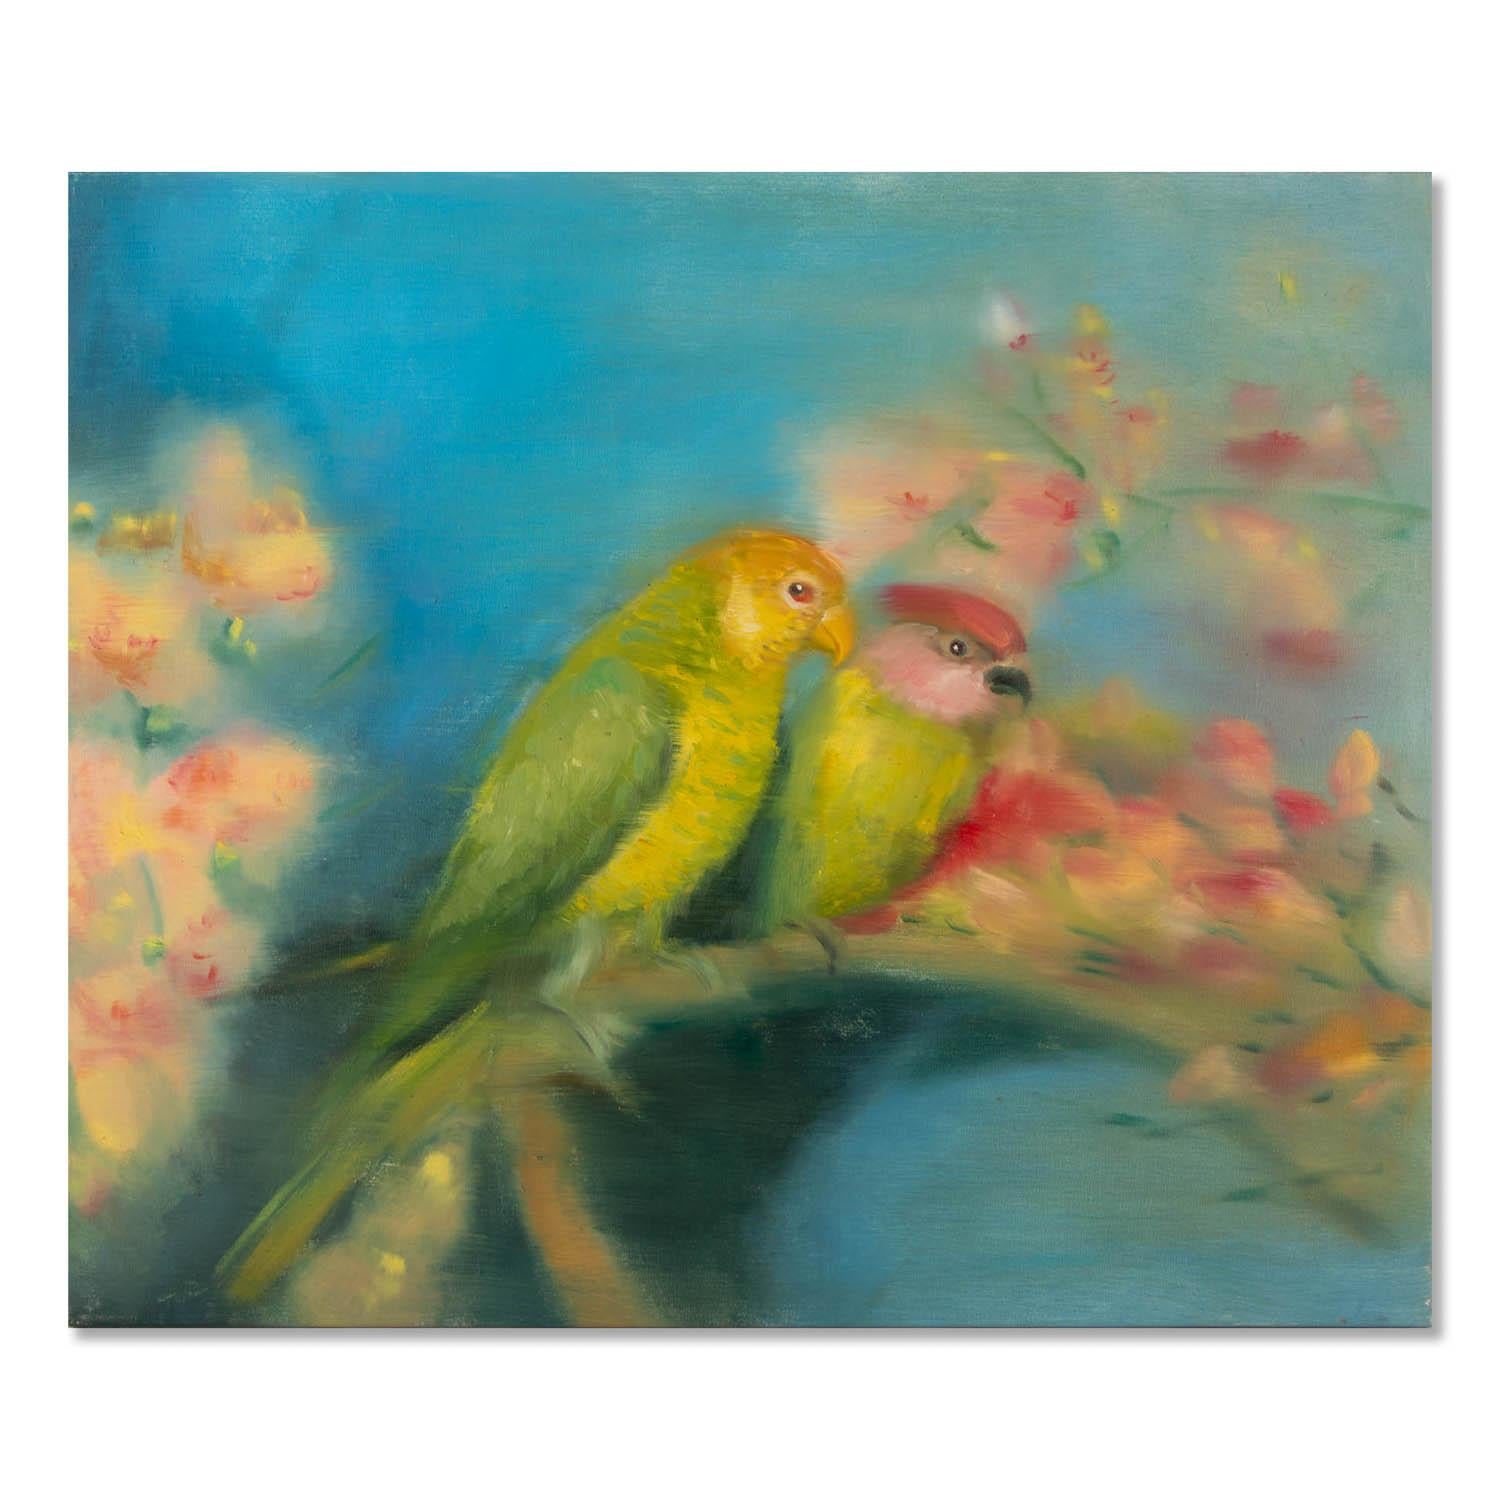  Title: In Pairs
 Medium: Oil on canvas
 Size: 23 x 28 inches
 Frame: Framing options available!
 Condition: The painting appears to be in excellent condition.
 
 Year: 2000 Circa
 Artist: Dongxing Huang
 Signature: Unsigned
 Signature Location: